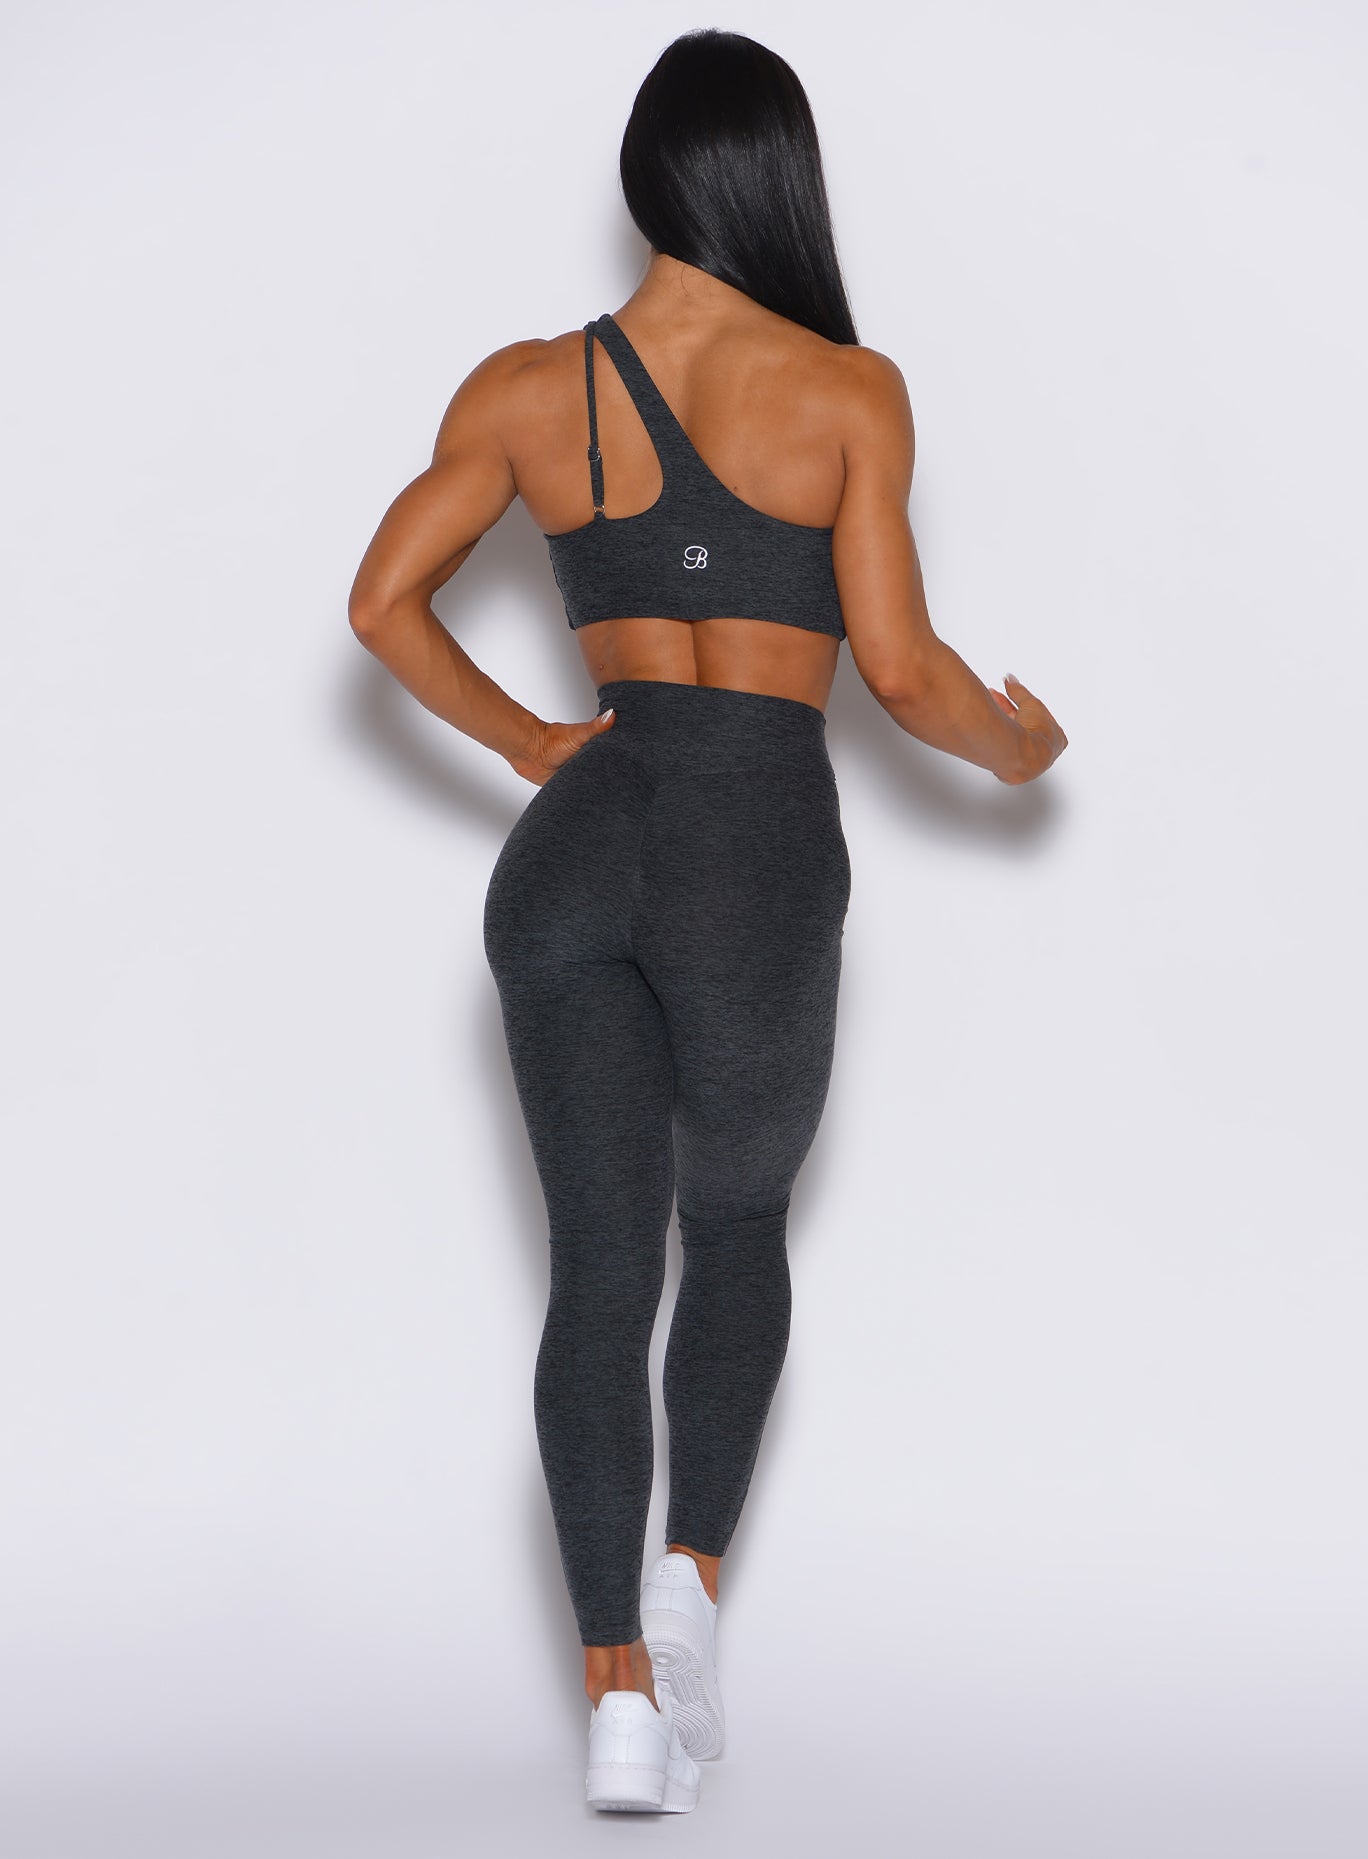 back profile view of a model wearing our V Active Leggings in charcoal color along with the matching top